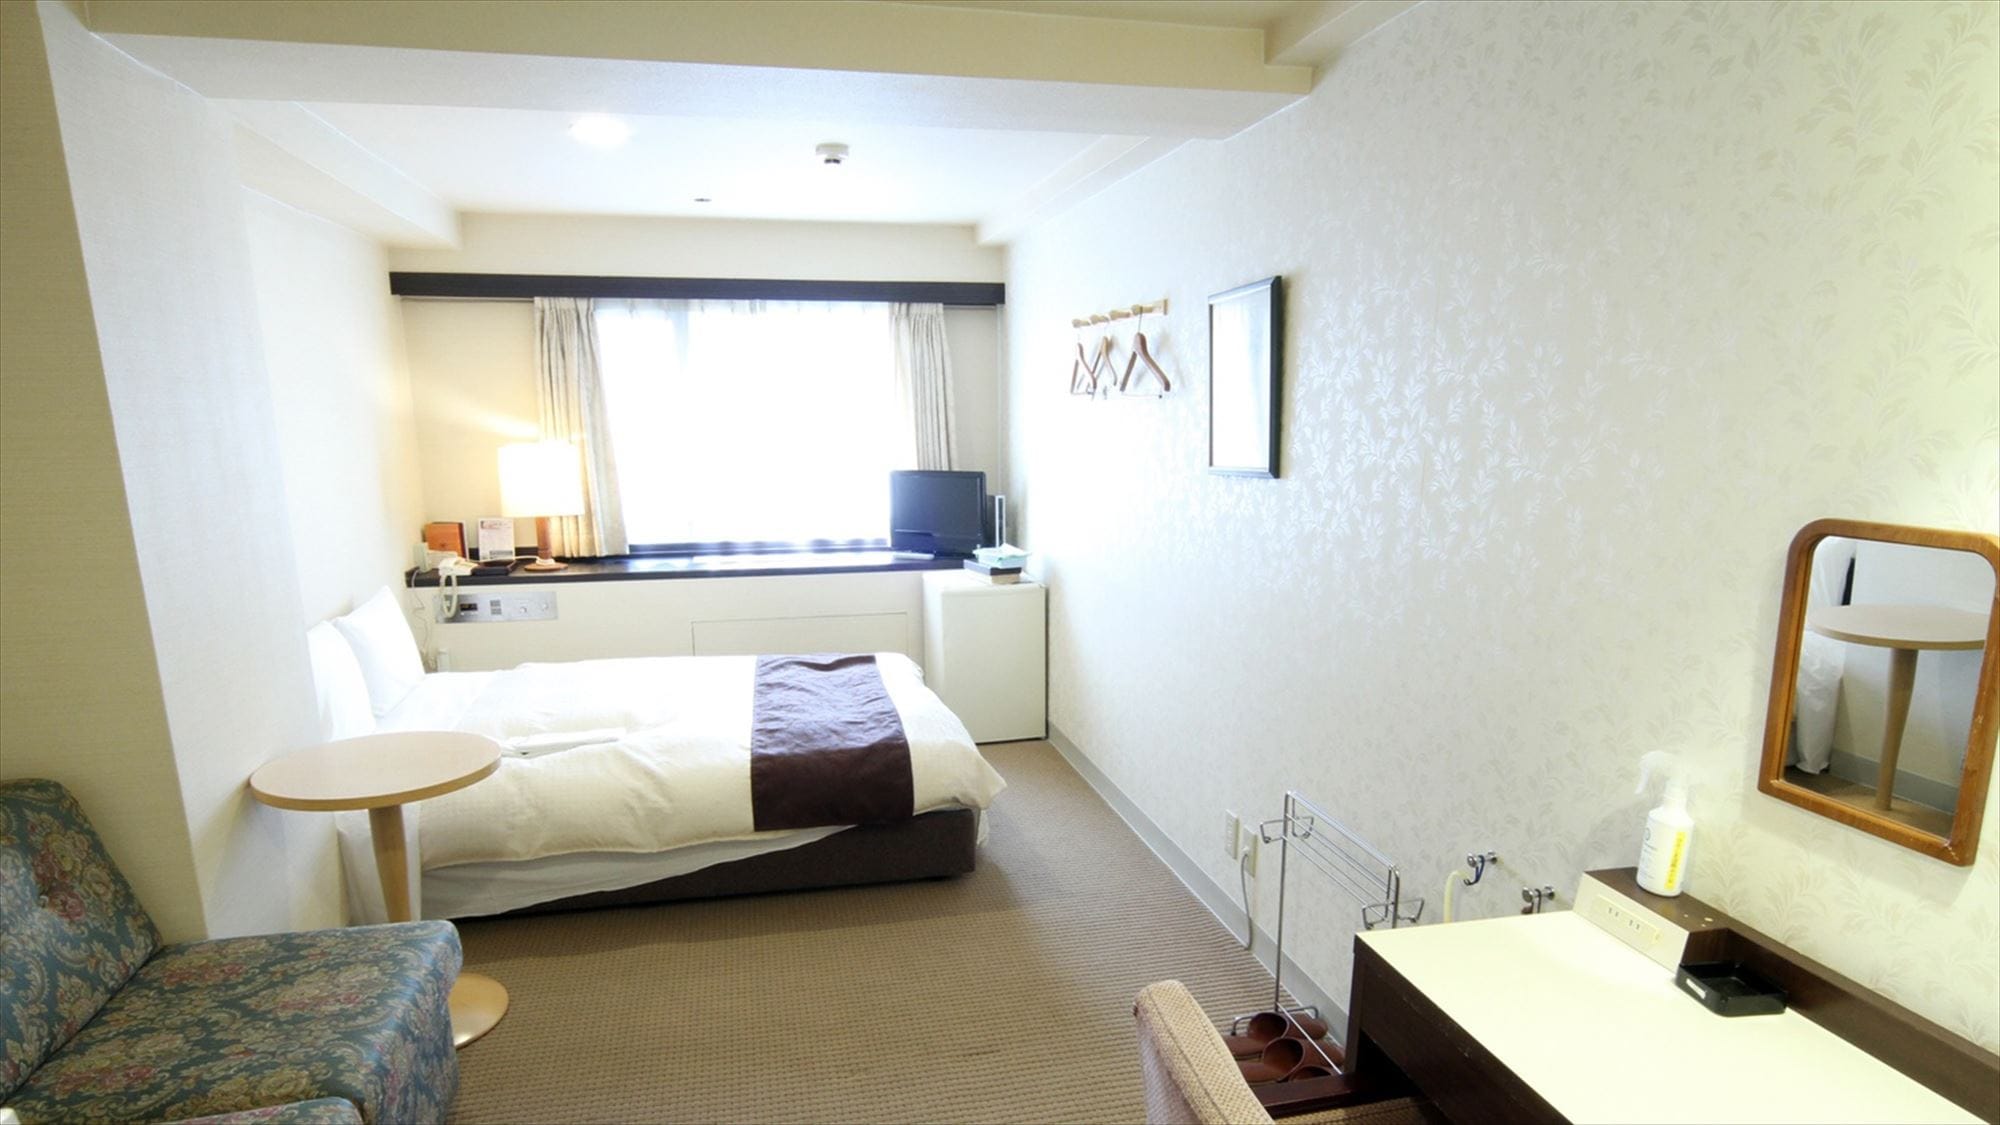 Double room size 17.1㎡, bed size 139cm